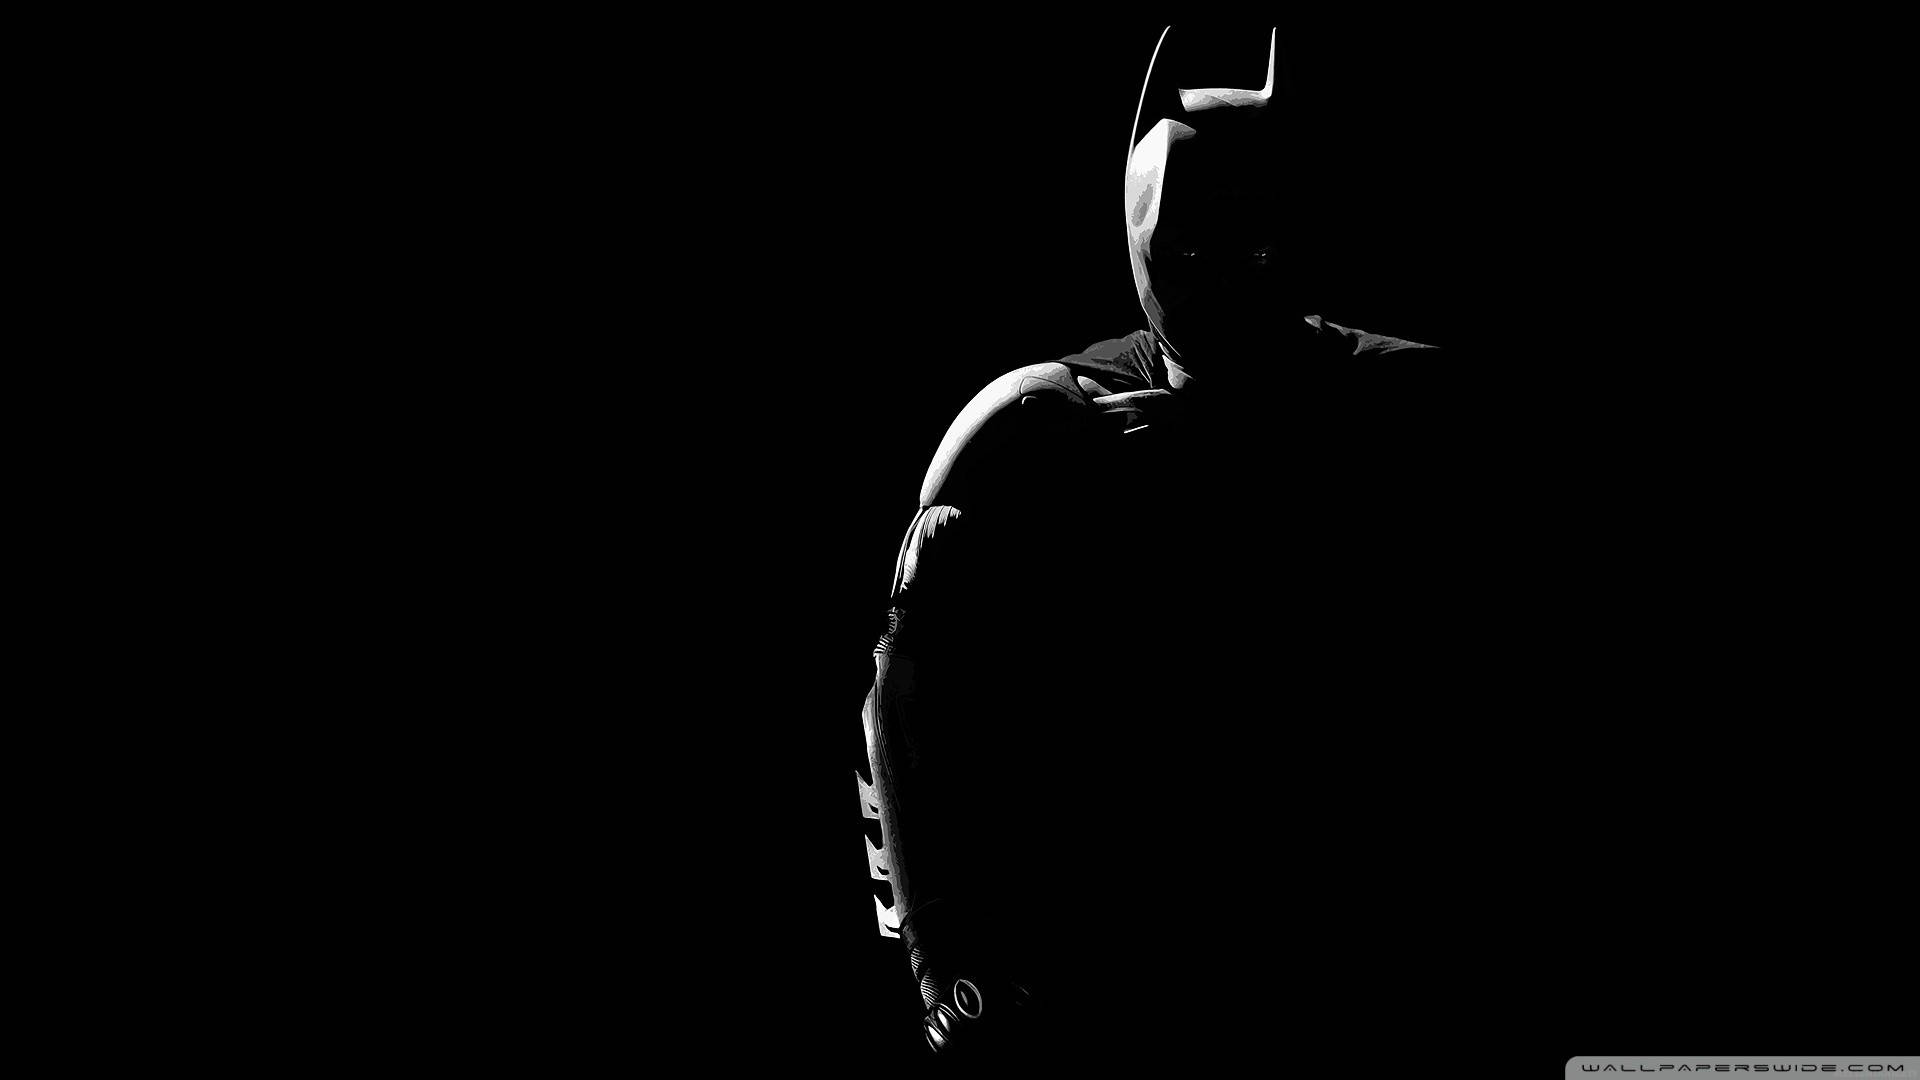 The Dark Knight 1920X1080 Wallpaper and Background Image